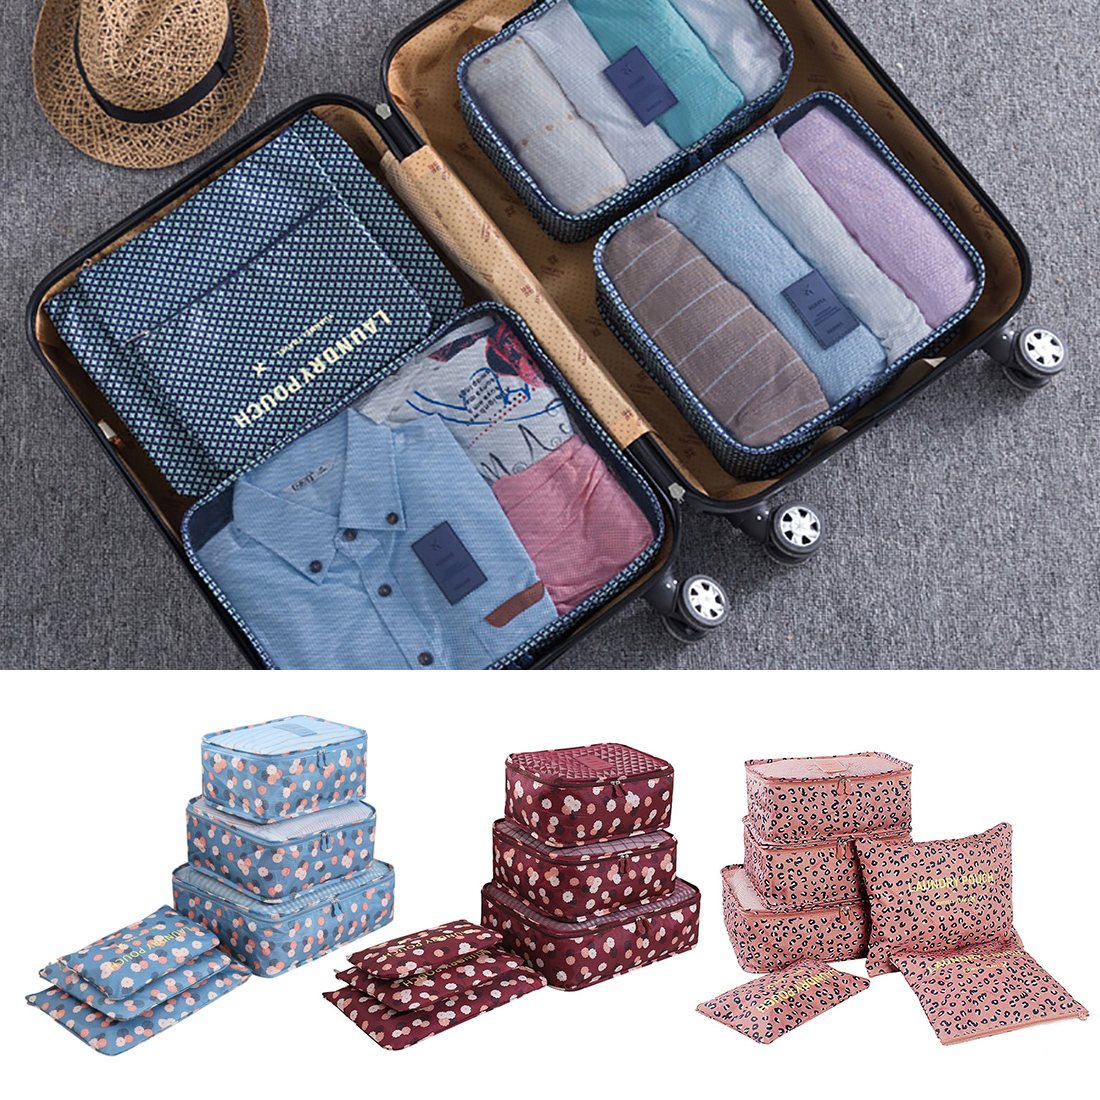 6Pcs Clothes Storage Bags Set Cube Leopard Printed Travel Home Luggage Organizer Pouch - Pink